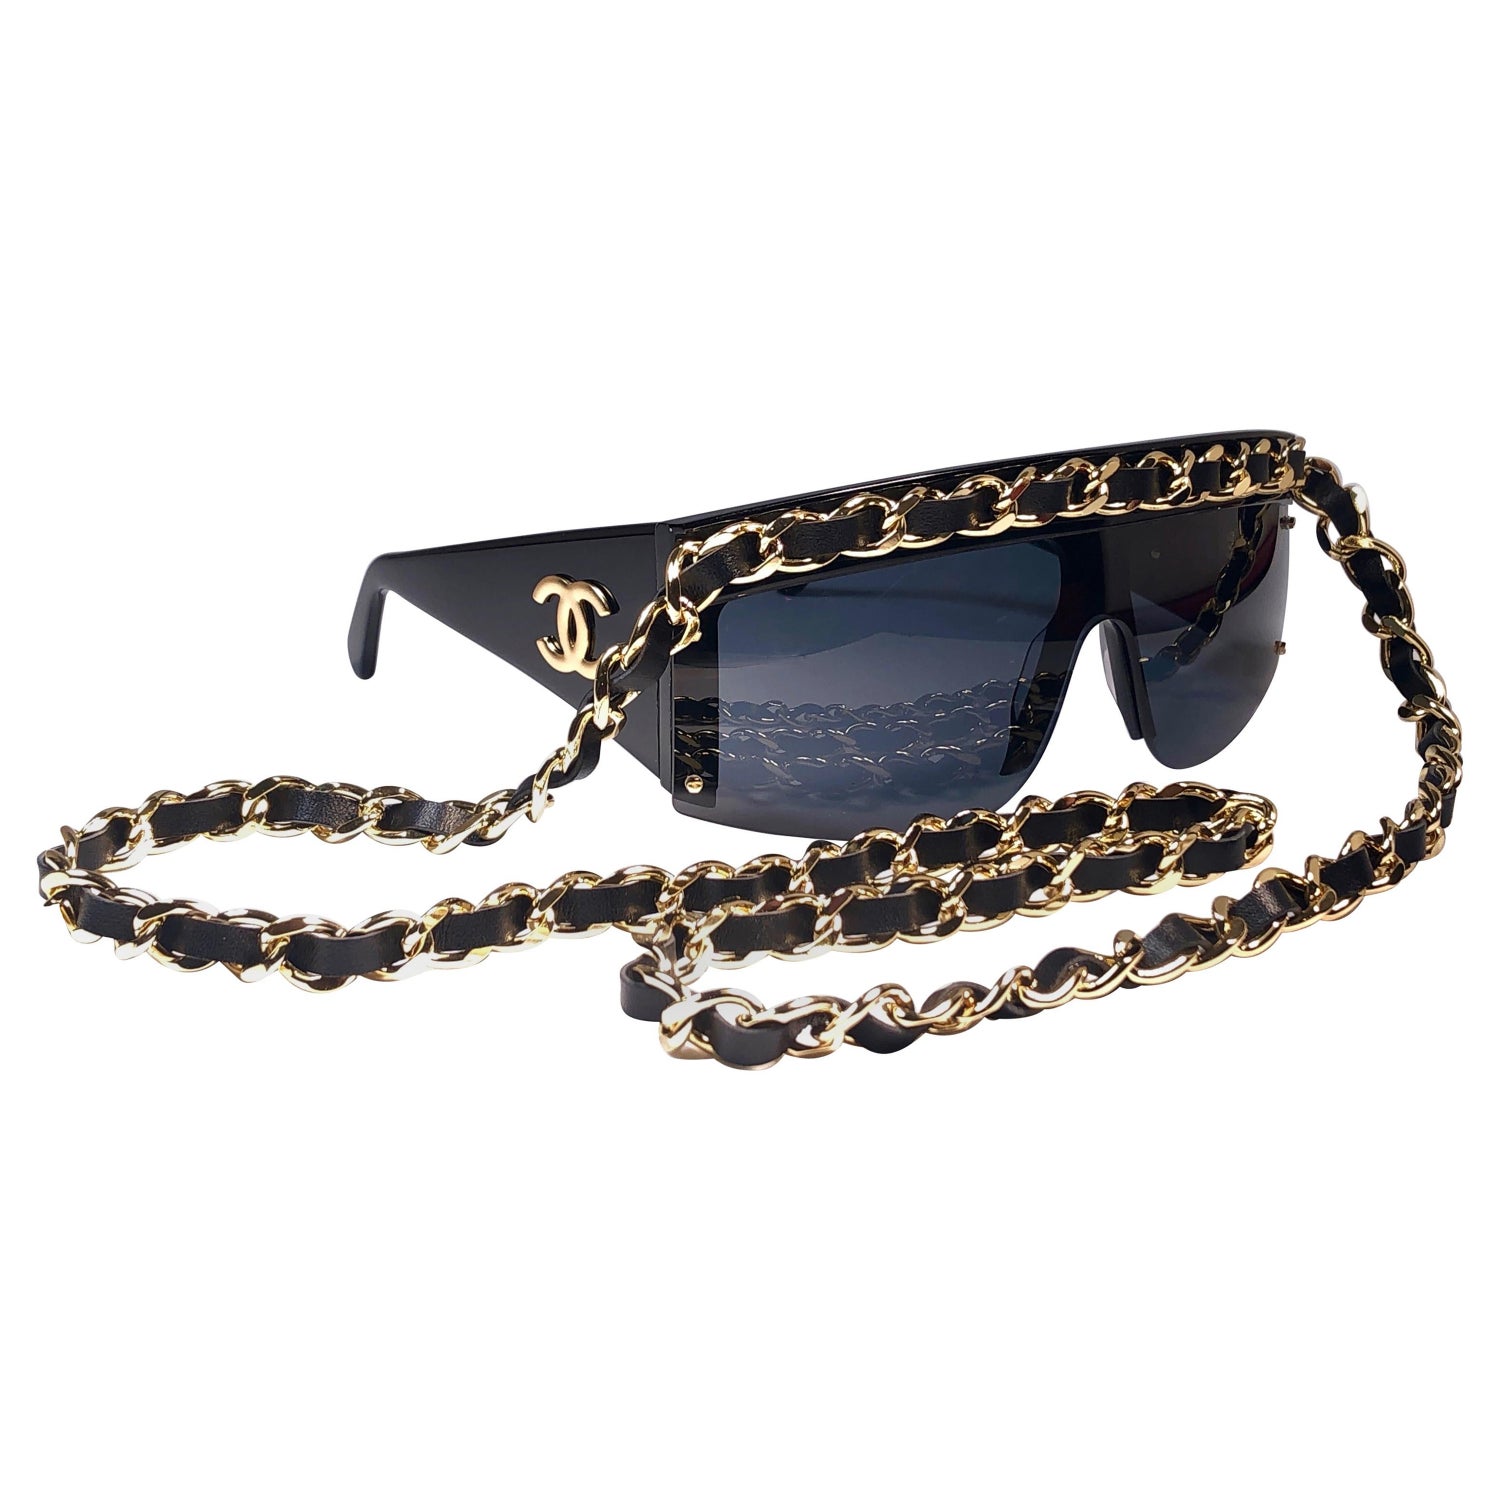 1992 Chanel Sunglasses - 2 For Sale on 1stDibs